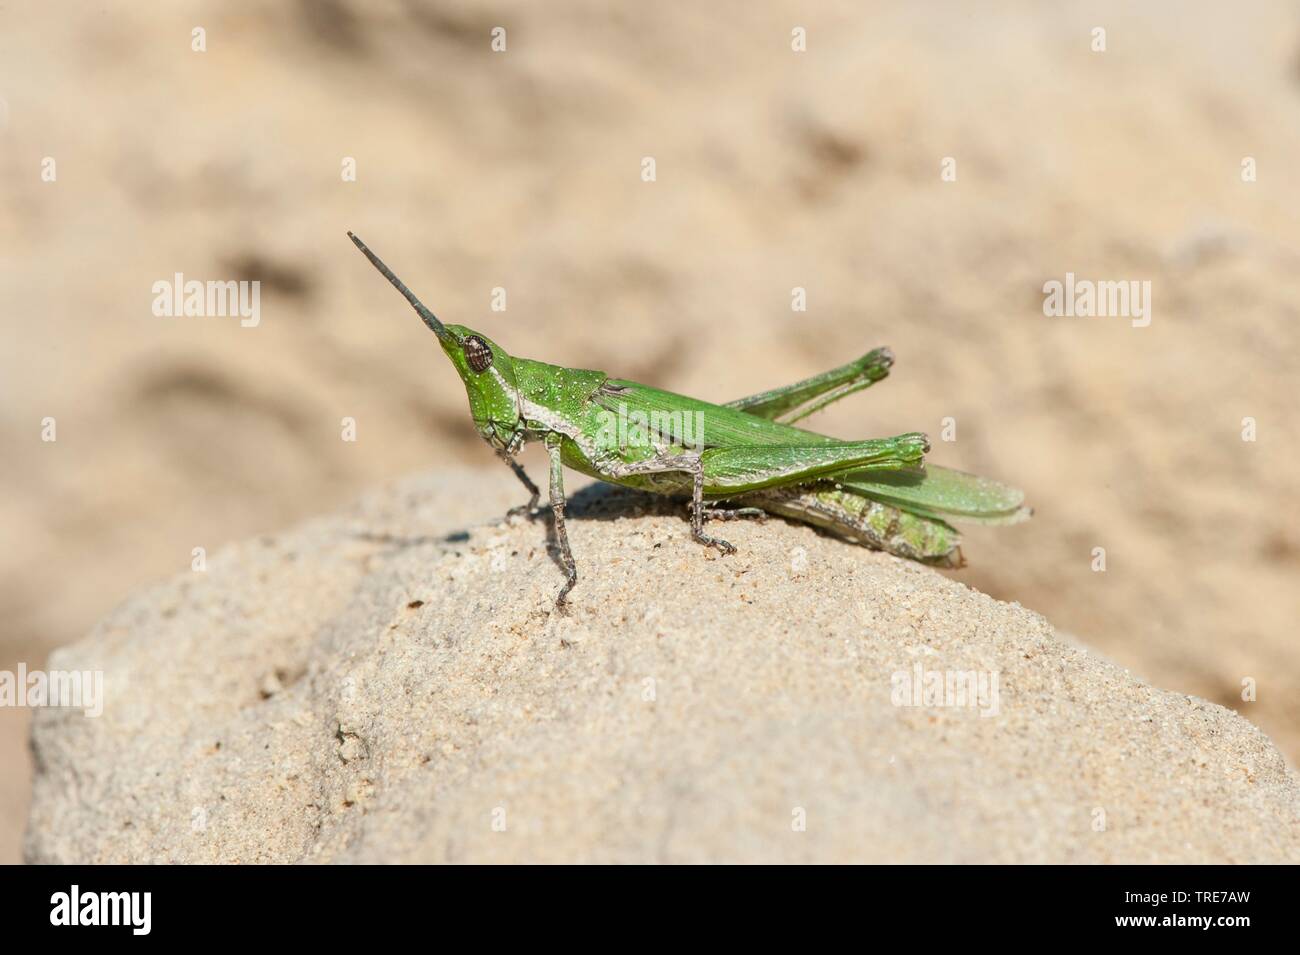 gaudy grasshoppers (Pyrgomorpha conica), sits on a stone Stock Photo